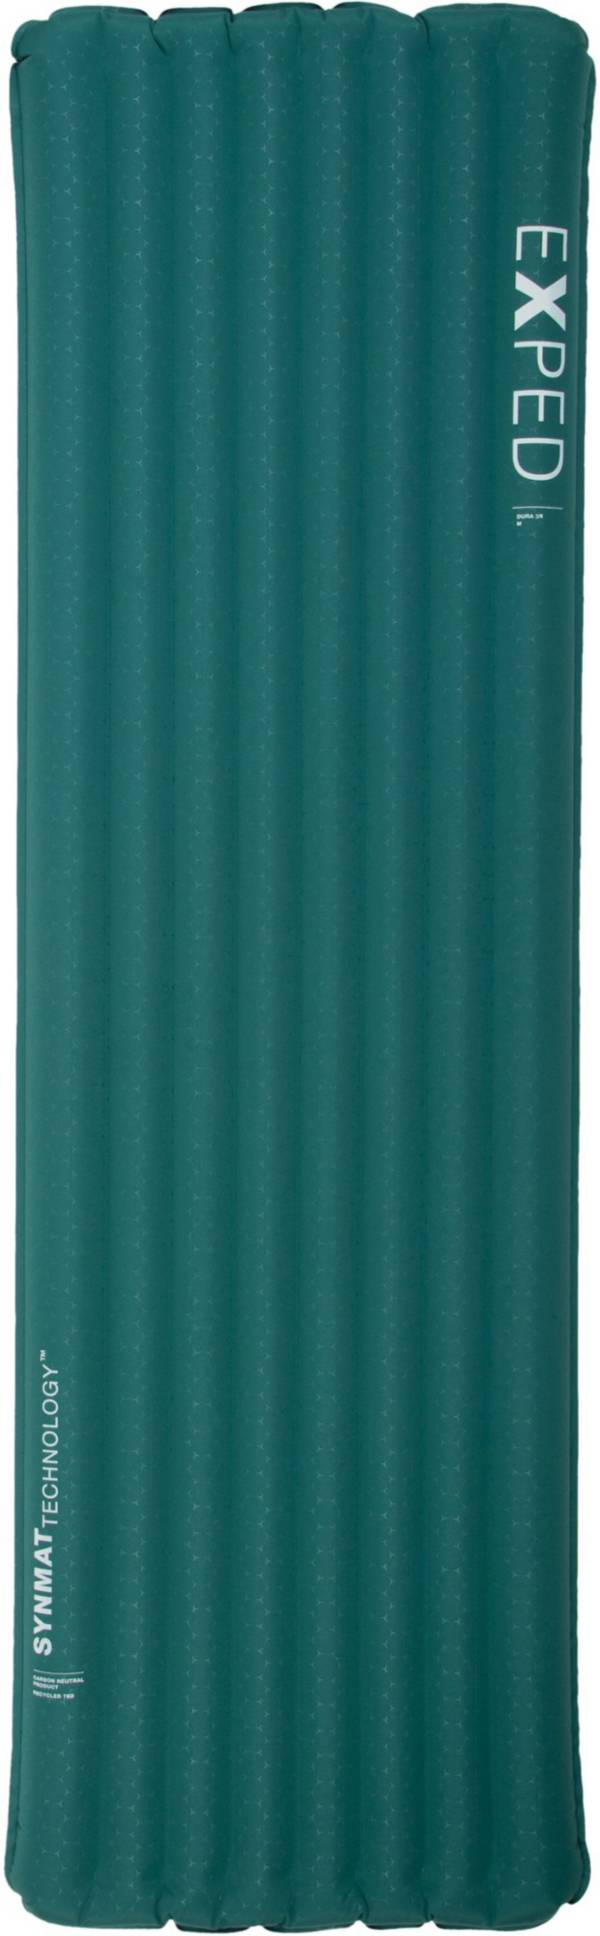 EXPED Dura 3R Insulated Sleeping Pad product image